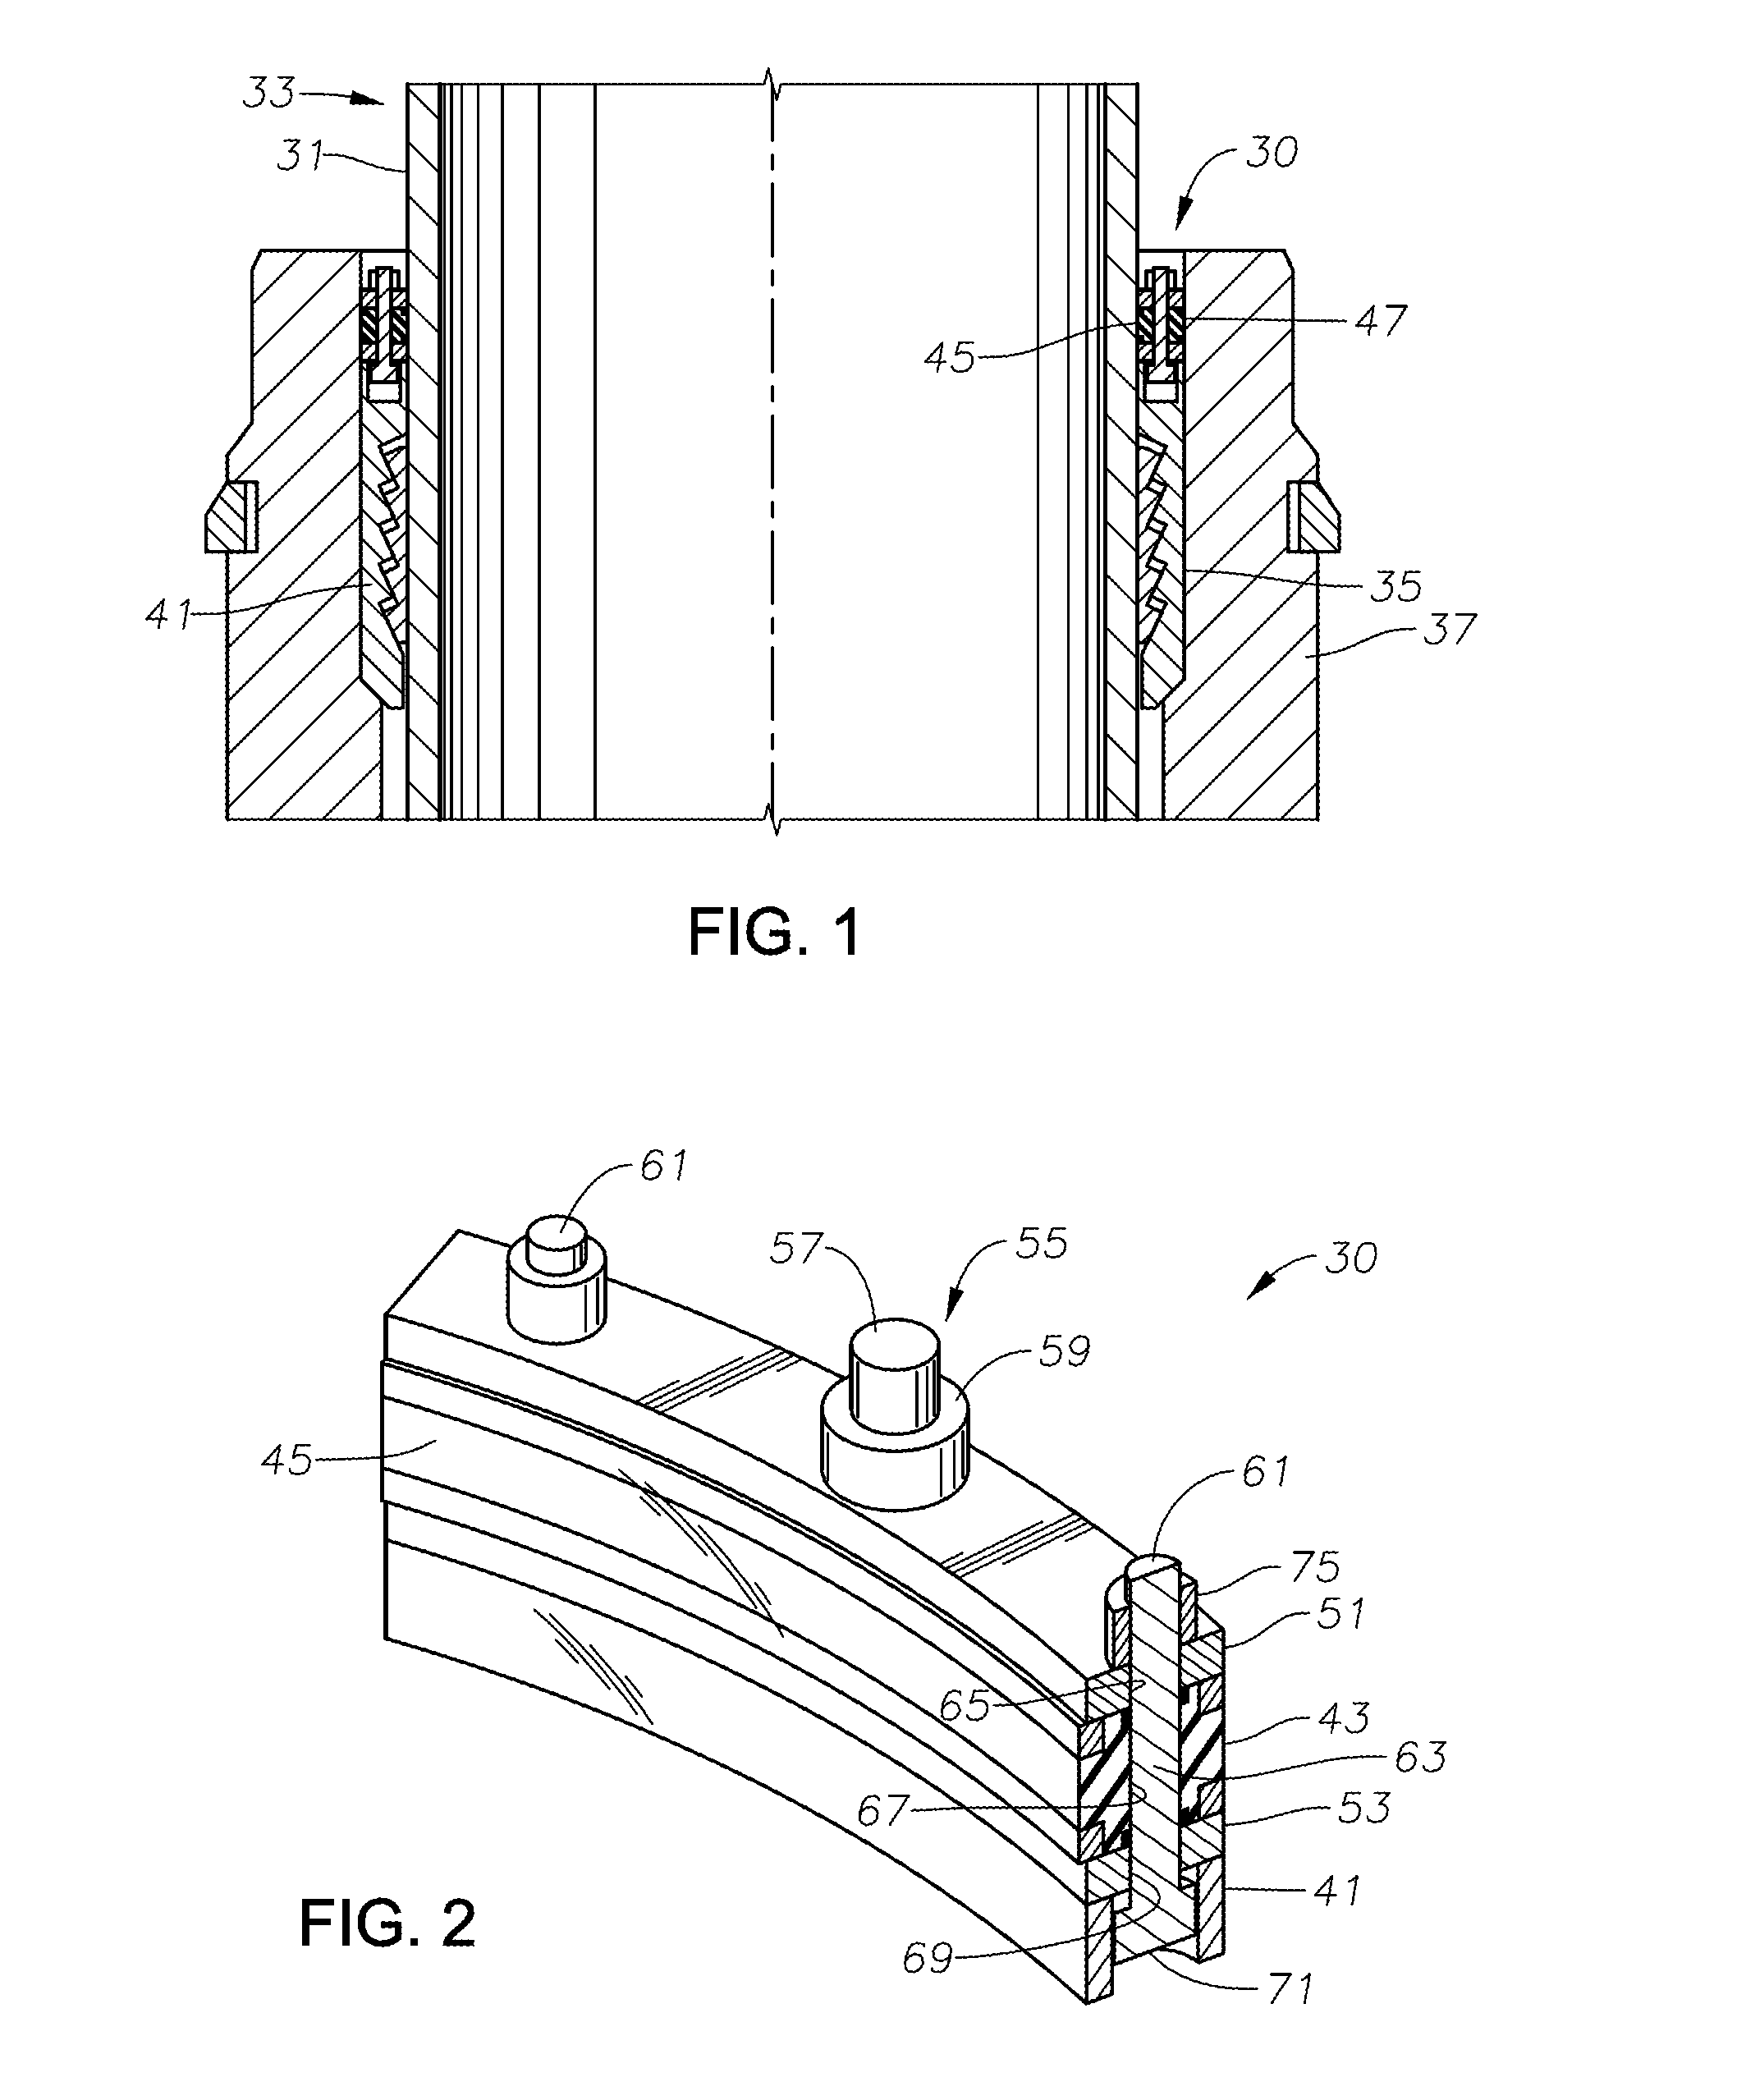 Shrinkage compensated seal assembly and related methods